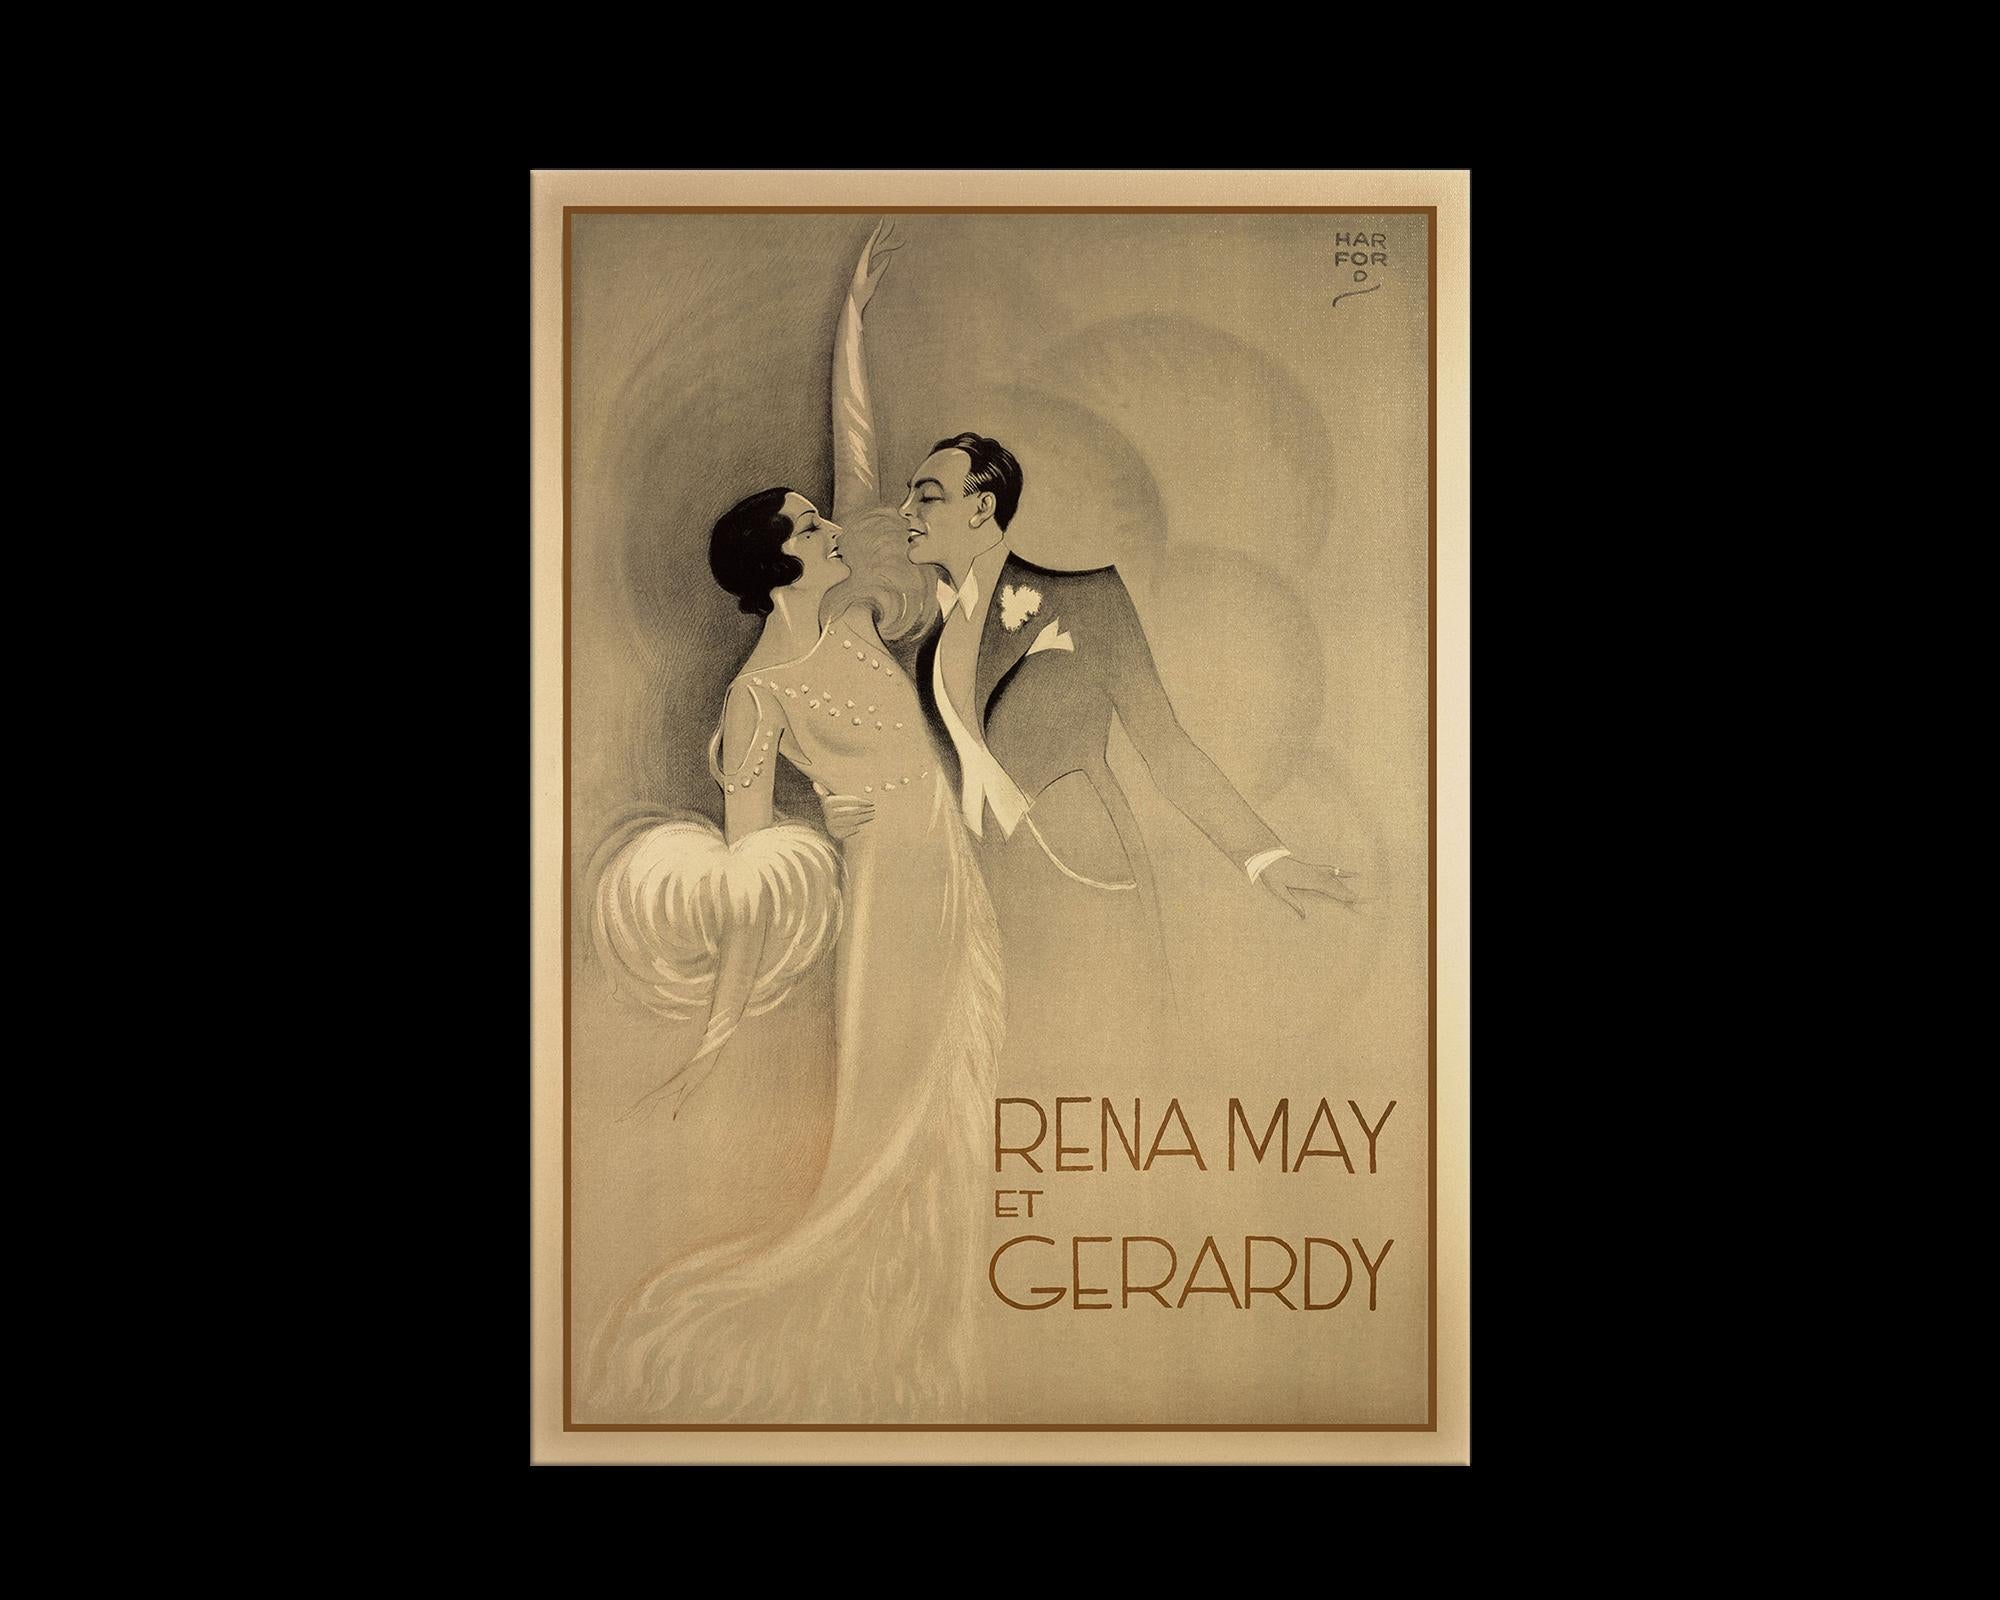 This large Art Deco masterpiece is a faithful yet nuanced reproduction of a vintage art poster titled 